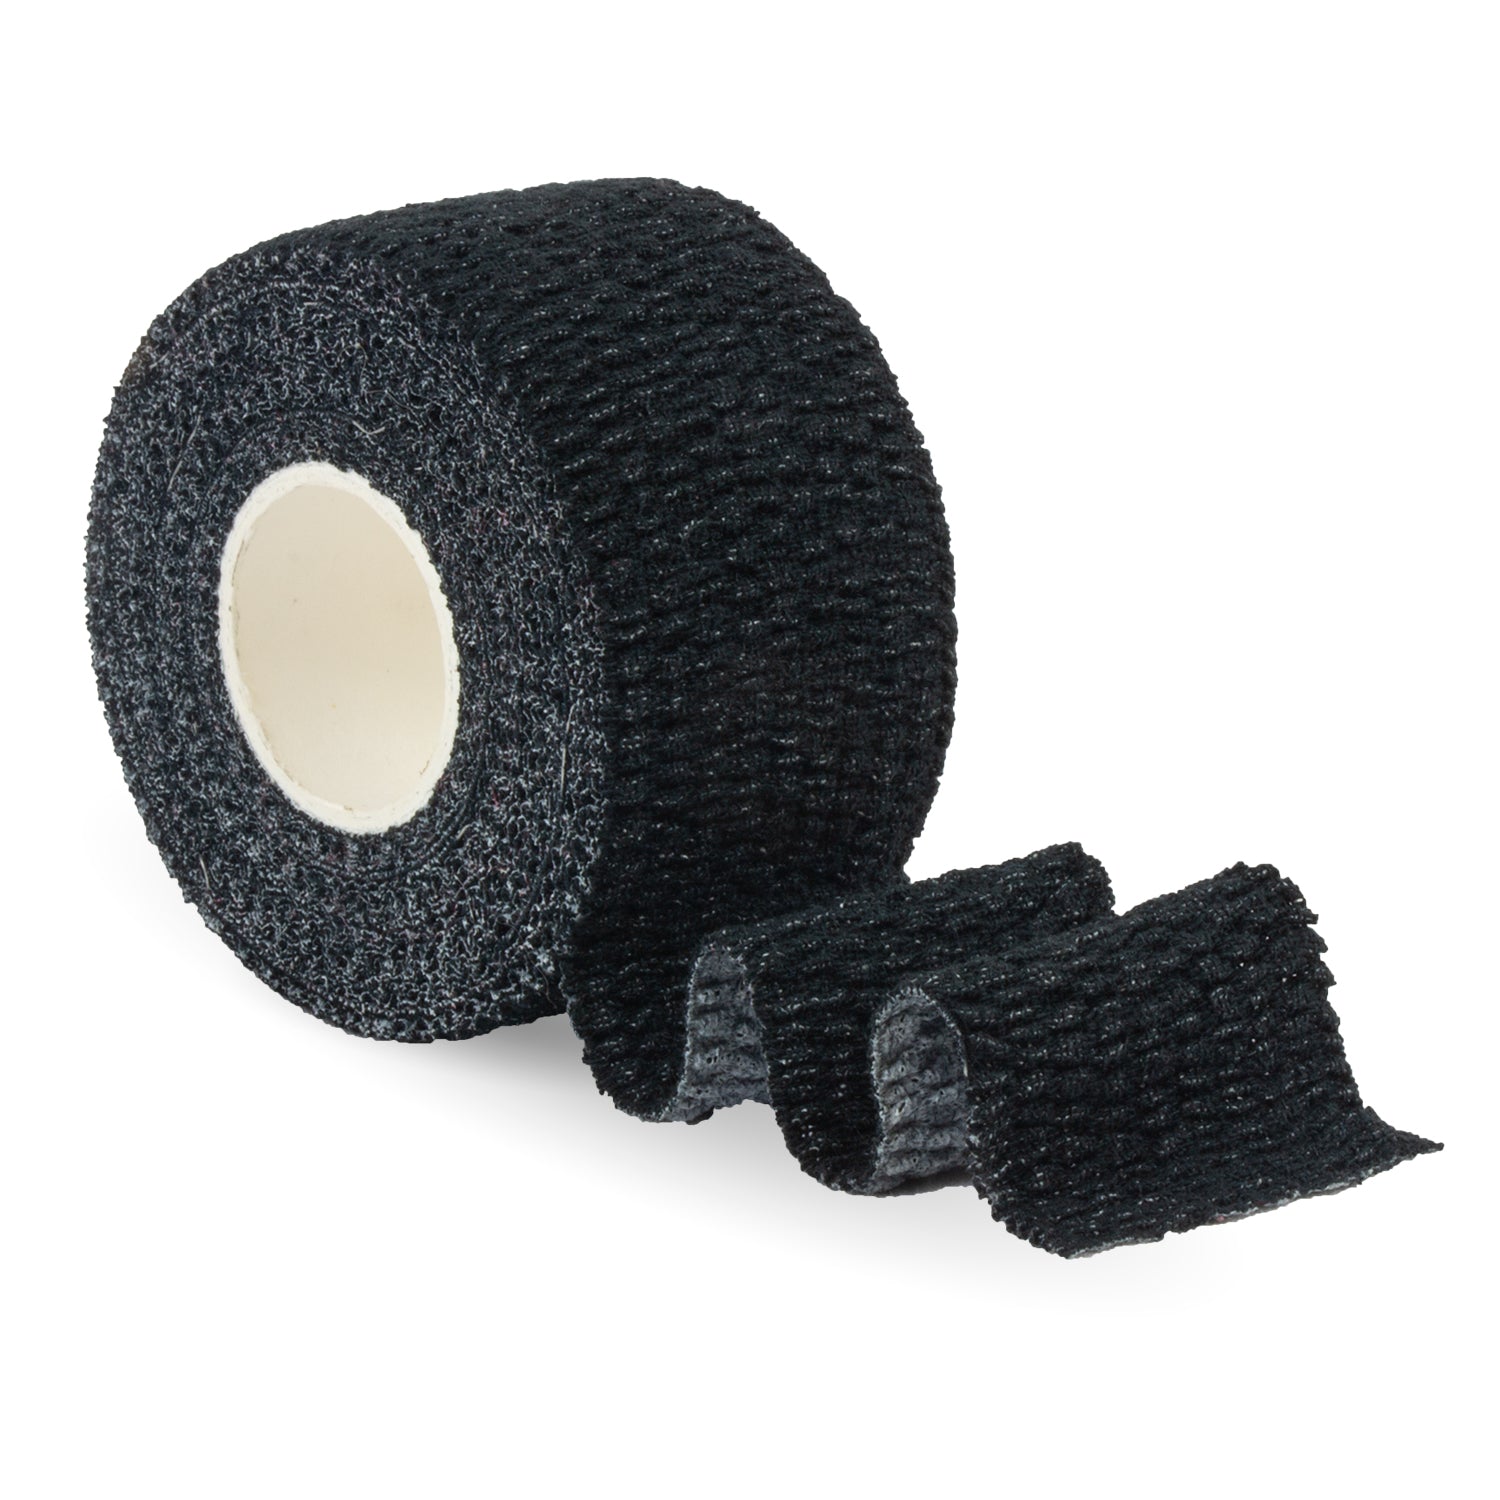 STASH Weightlifting  What is weightlifting tape for?